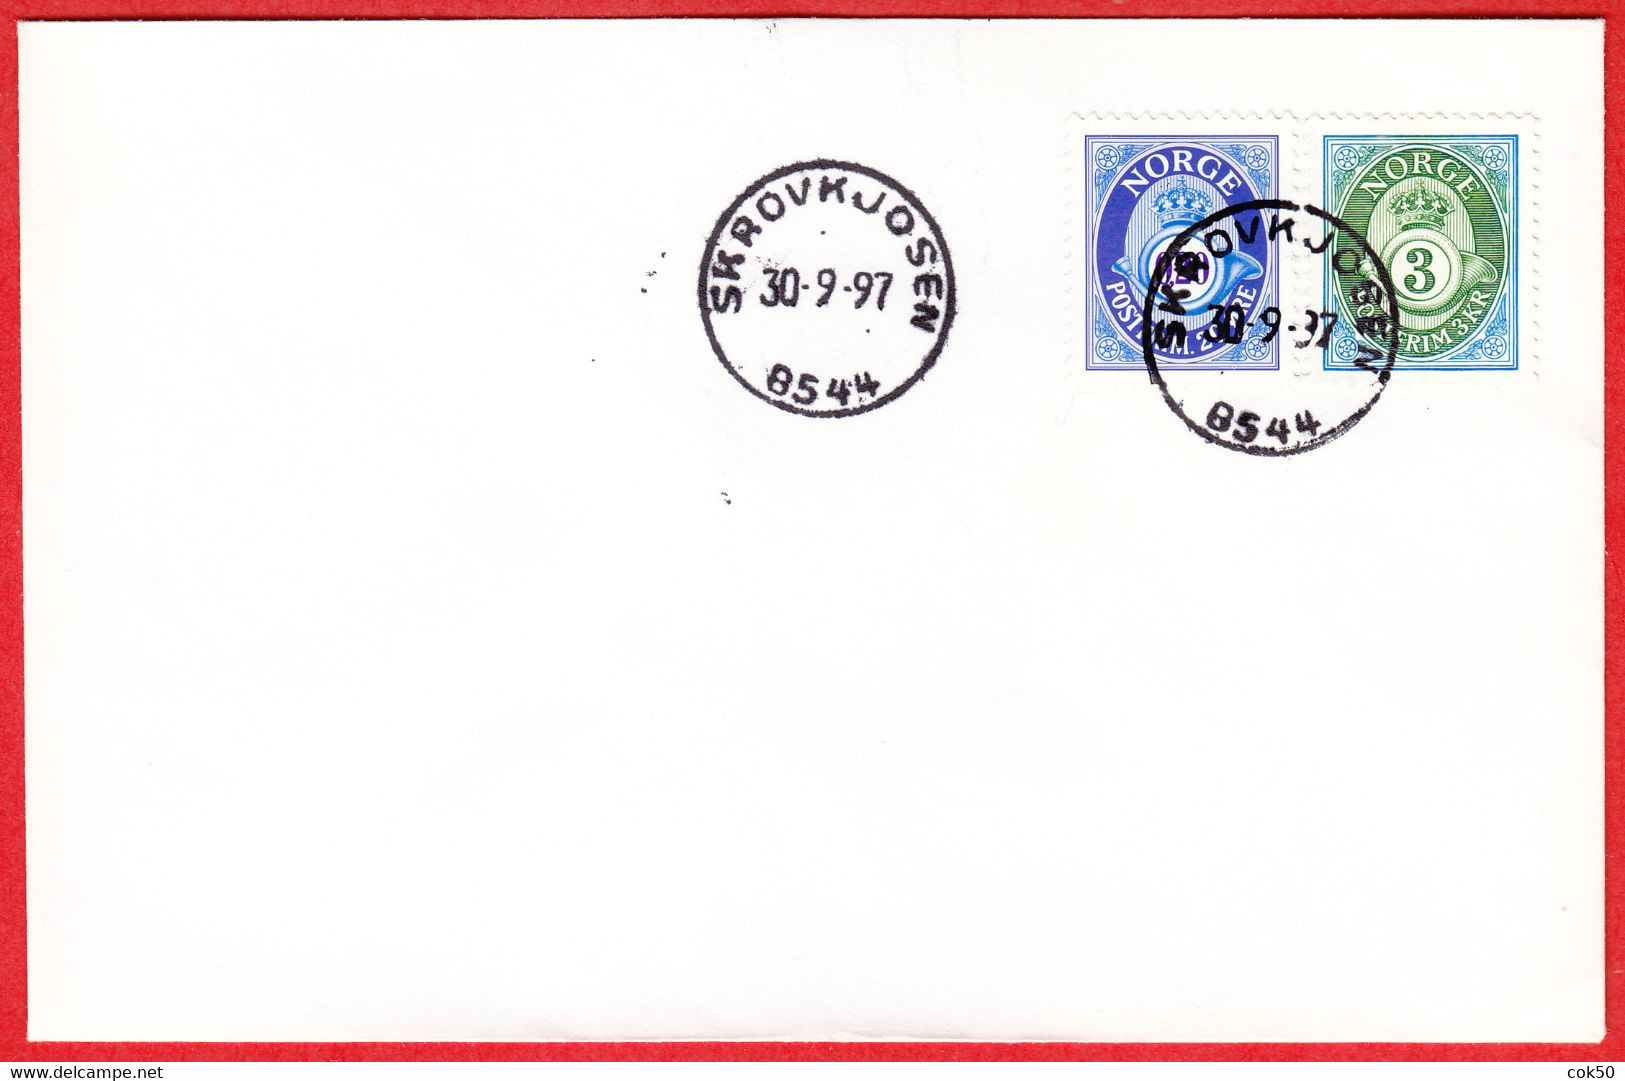 NORWAY -  8544 SKROVKJOSEN - (Nordland County) - Last Day/postoffice Closed On 1997.09.30 - Local Post Stamps